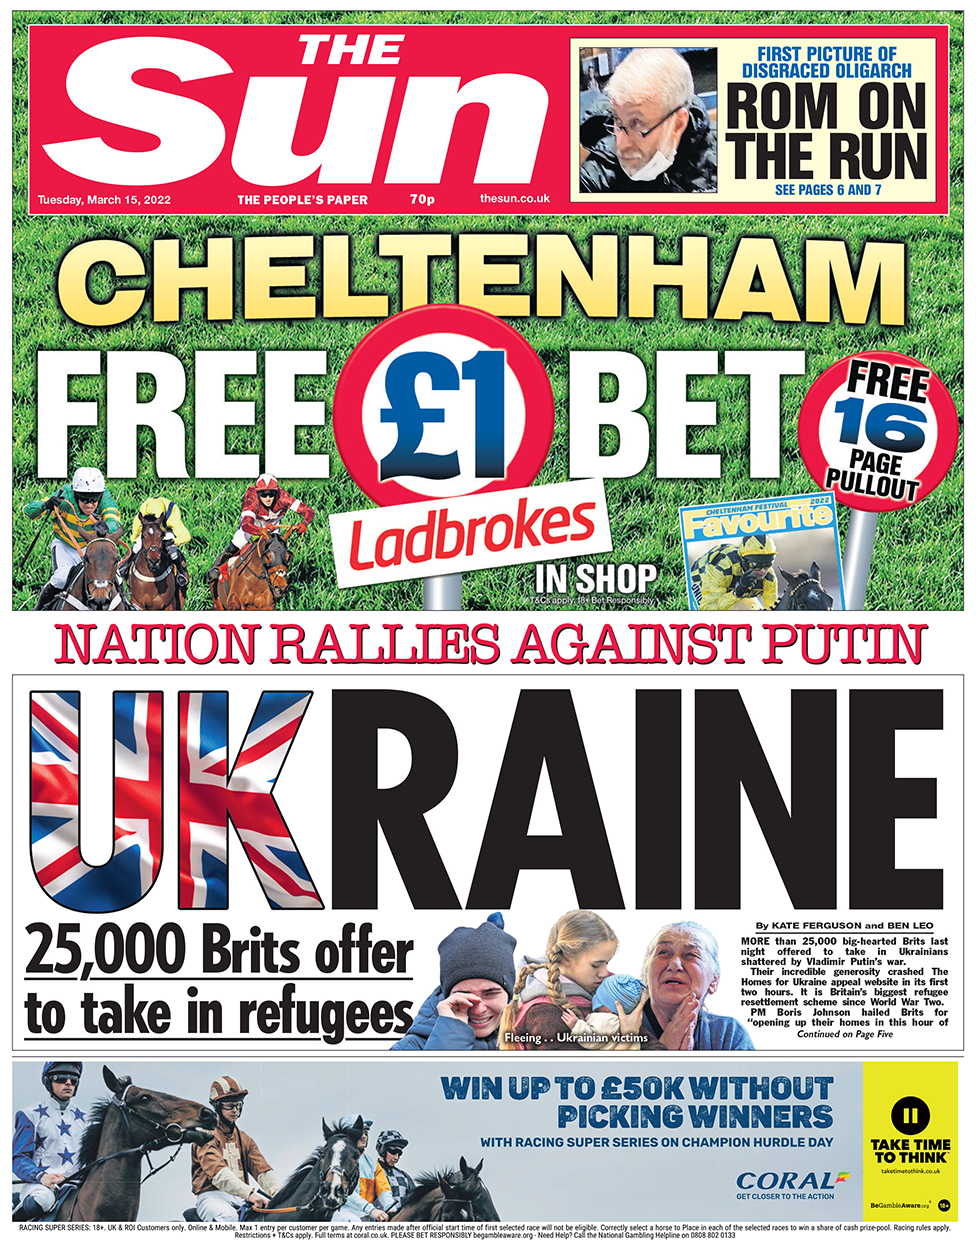 Front page of the Sun